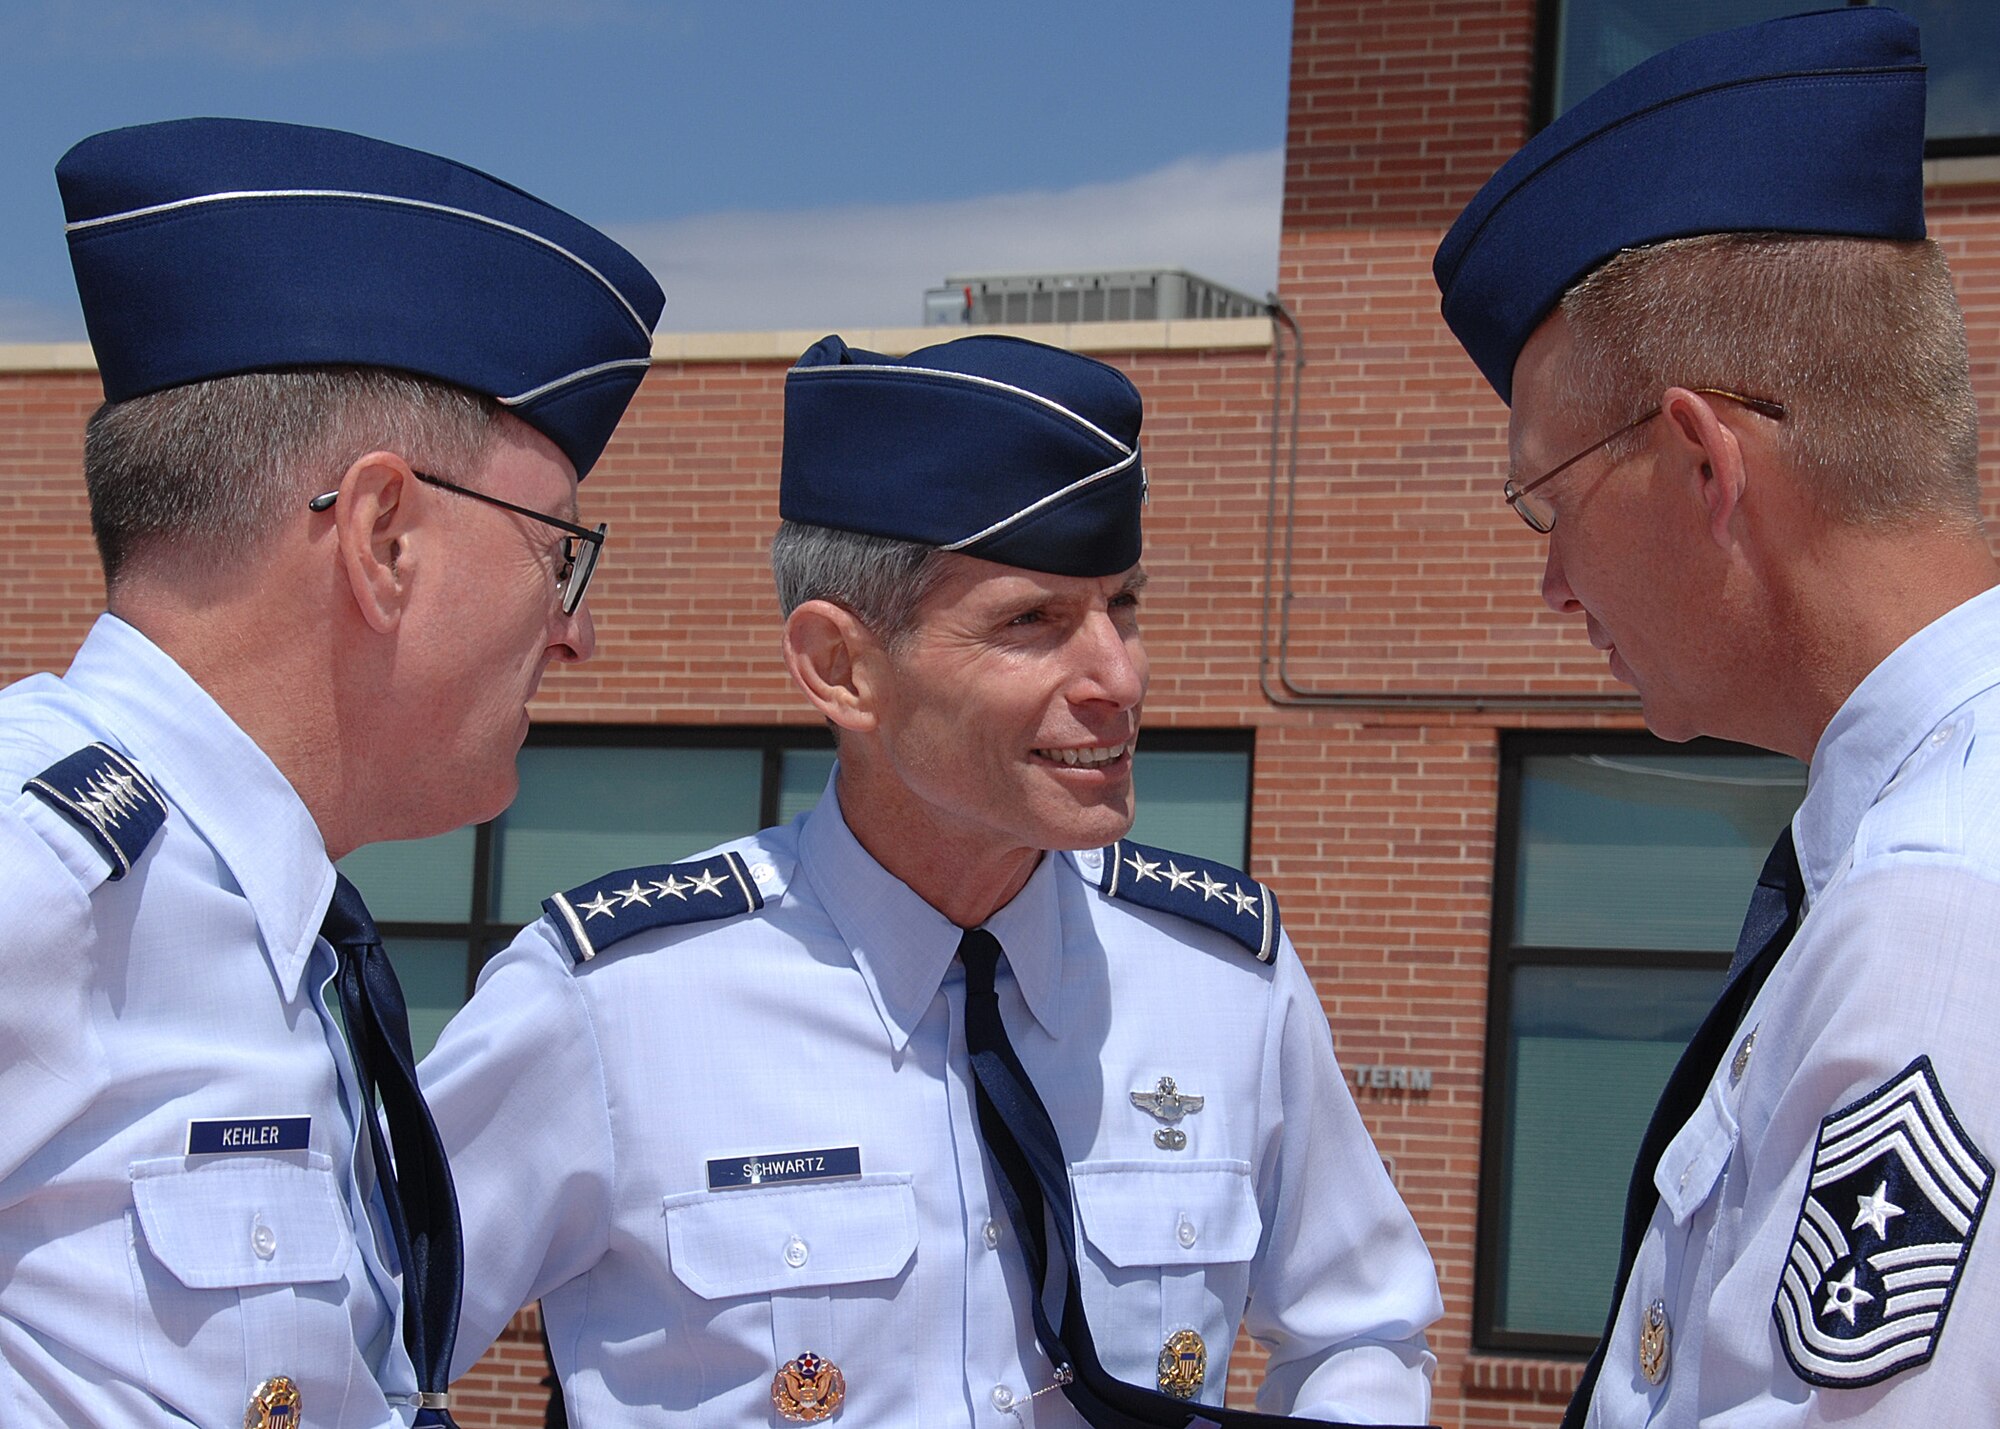 Air Force Space Command Commander Gen. C. Robert Kehler (left) and AFSPC Command Chief Todd Small (right) say farewell to Gen. Norton A. Schwartz, Air Force Chief of Staff, after he addressed Airmen at Peterson Air Force Base, Colo., Sept. 2. (U.S. Air Force photo/Duncan Wood)